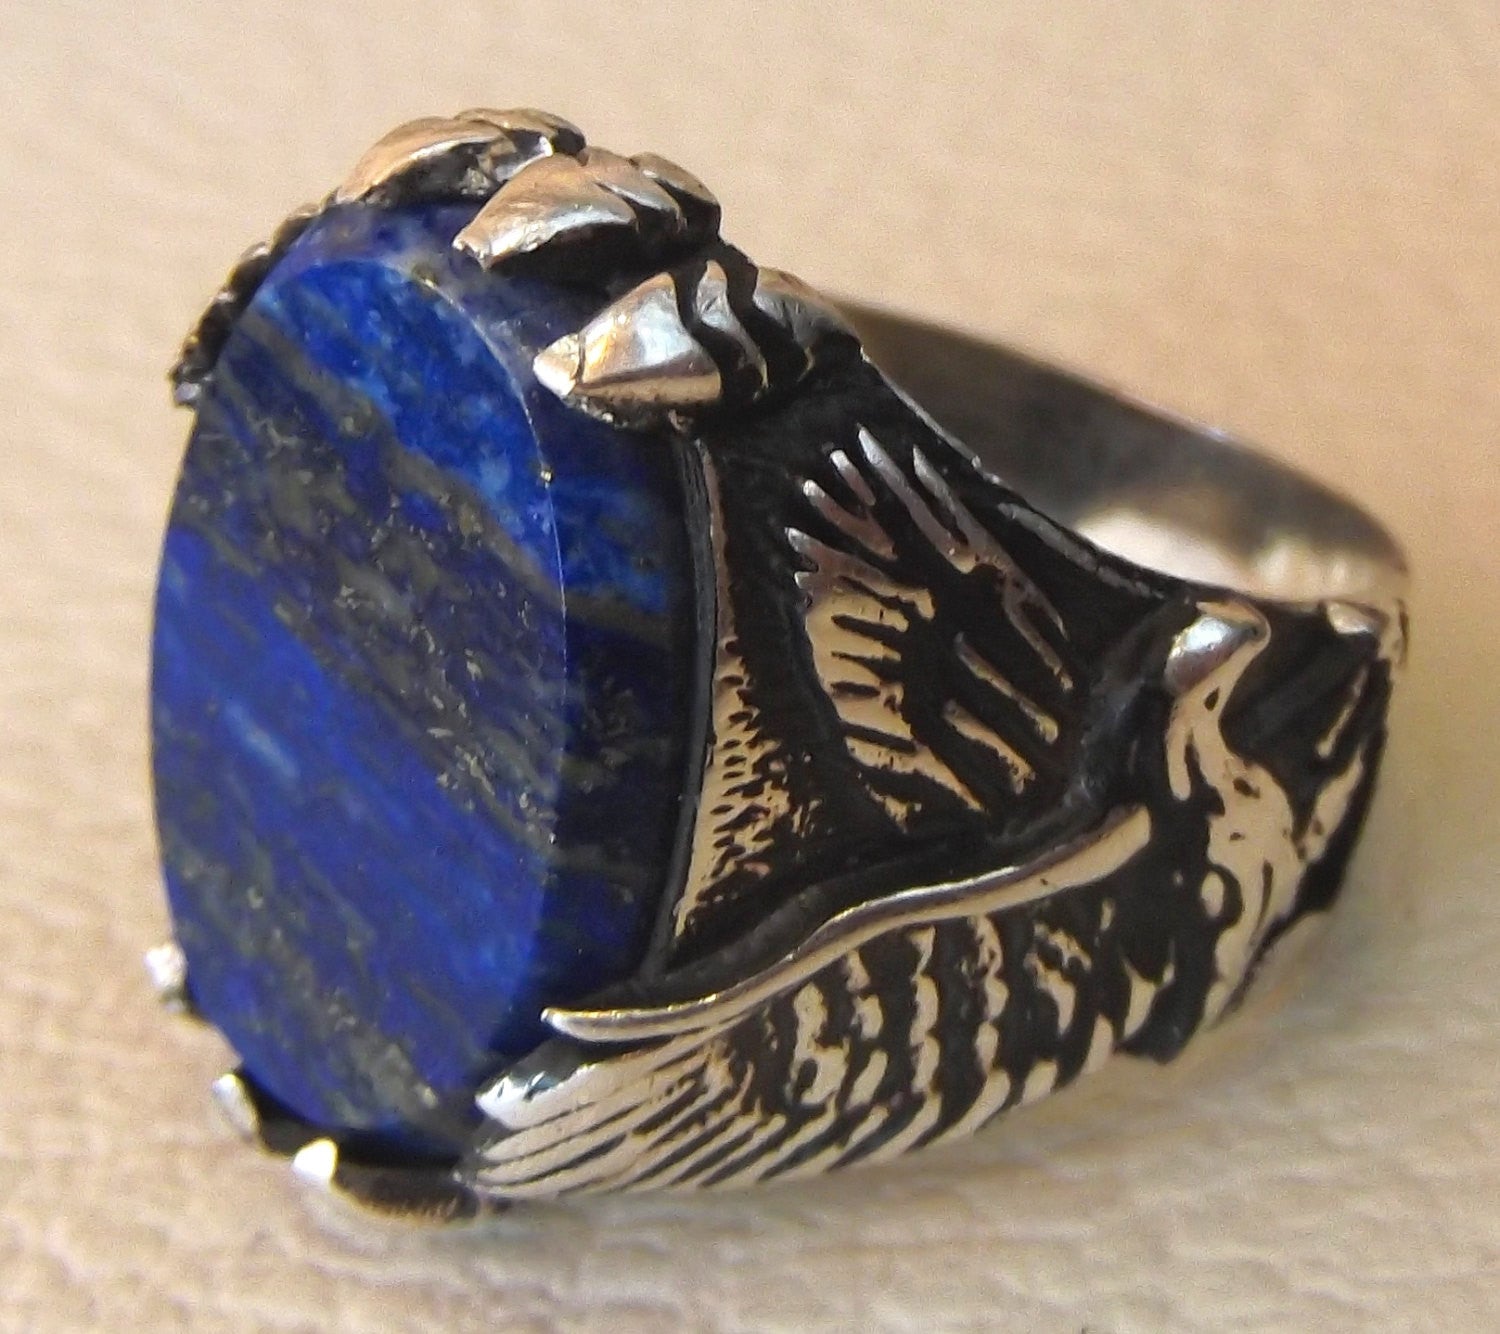 blue natural semi precious stone lapis lazuli gemstone sterling silver 925 men ring eagle all sizes flat oval gem antique style jewelry